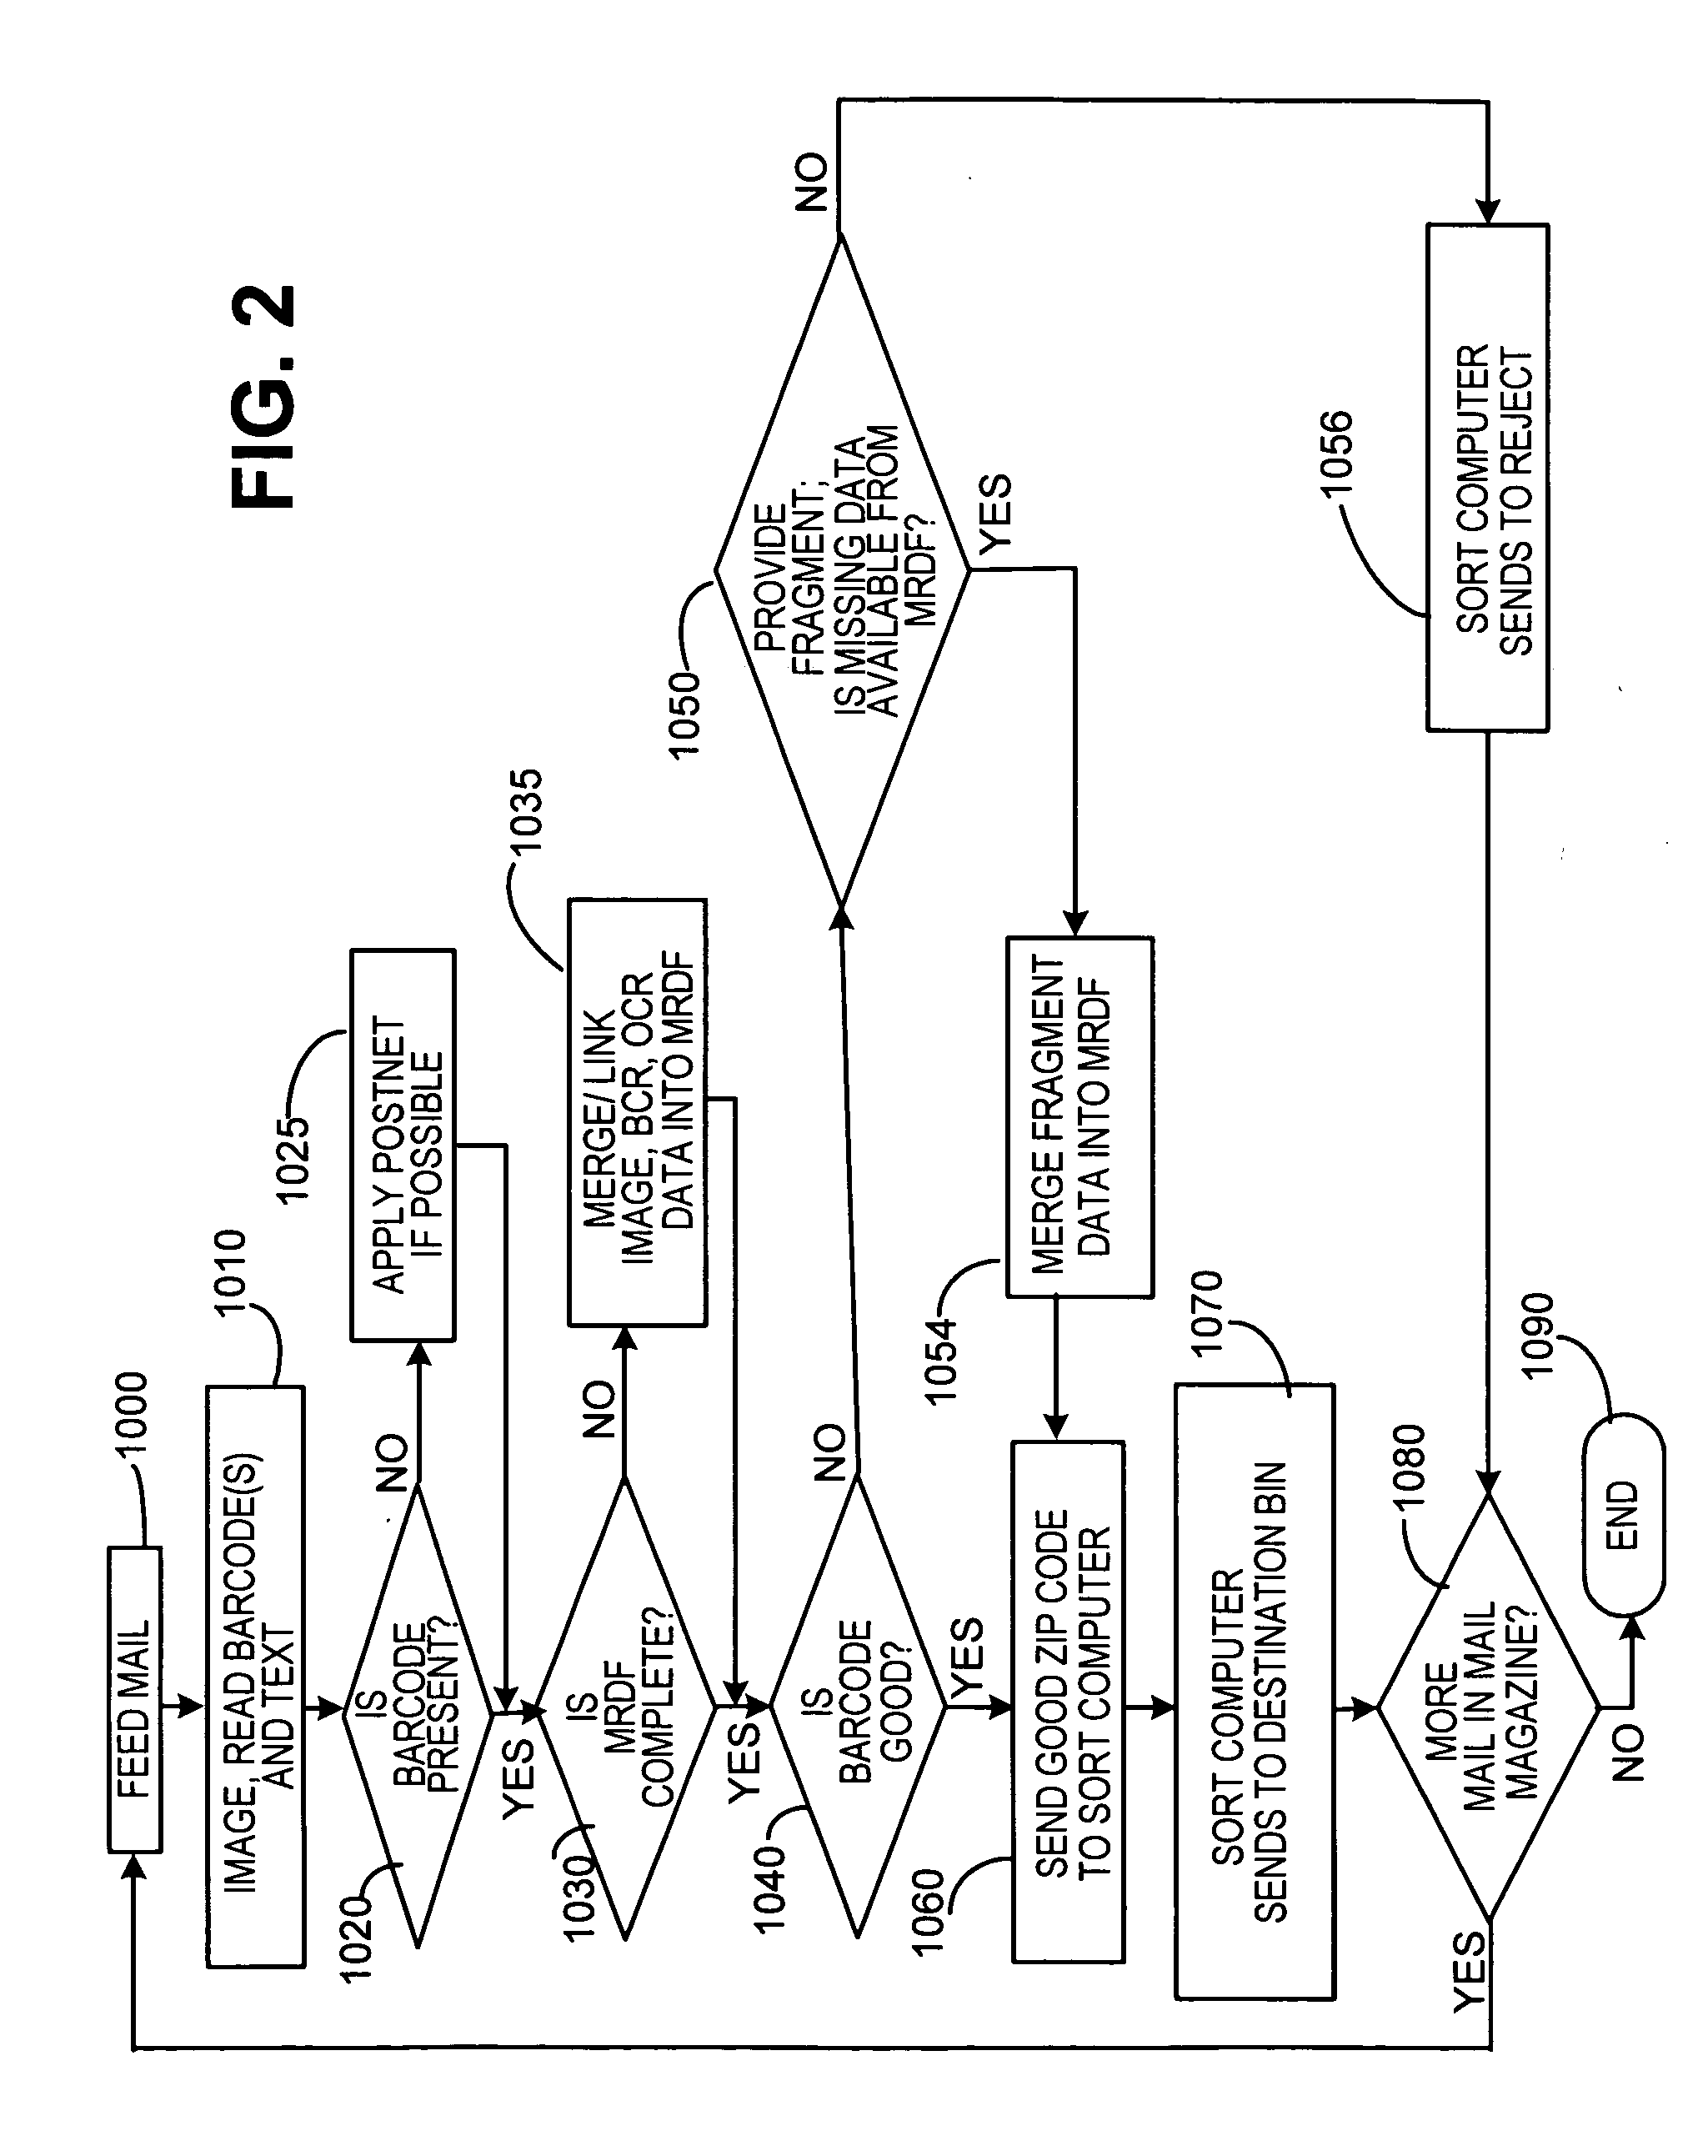 Method for enhancing mail piece processing system